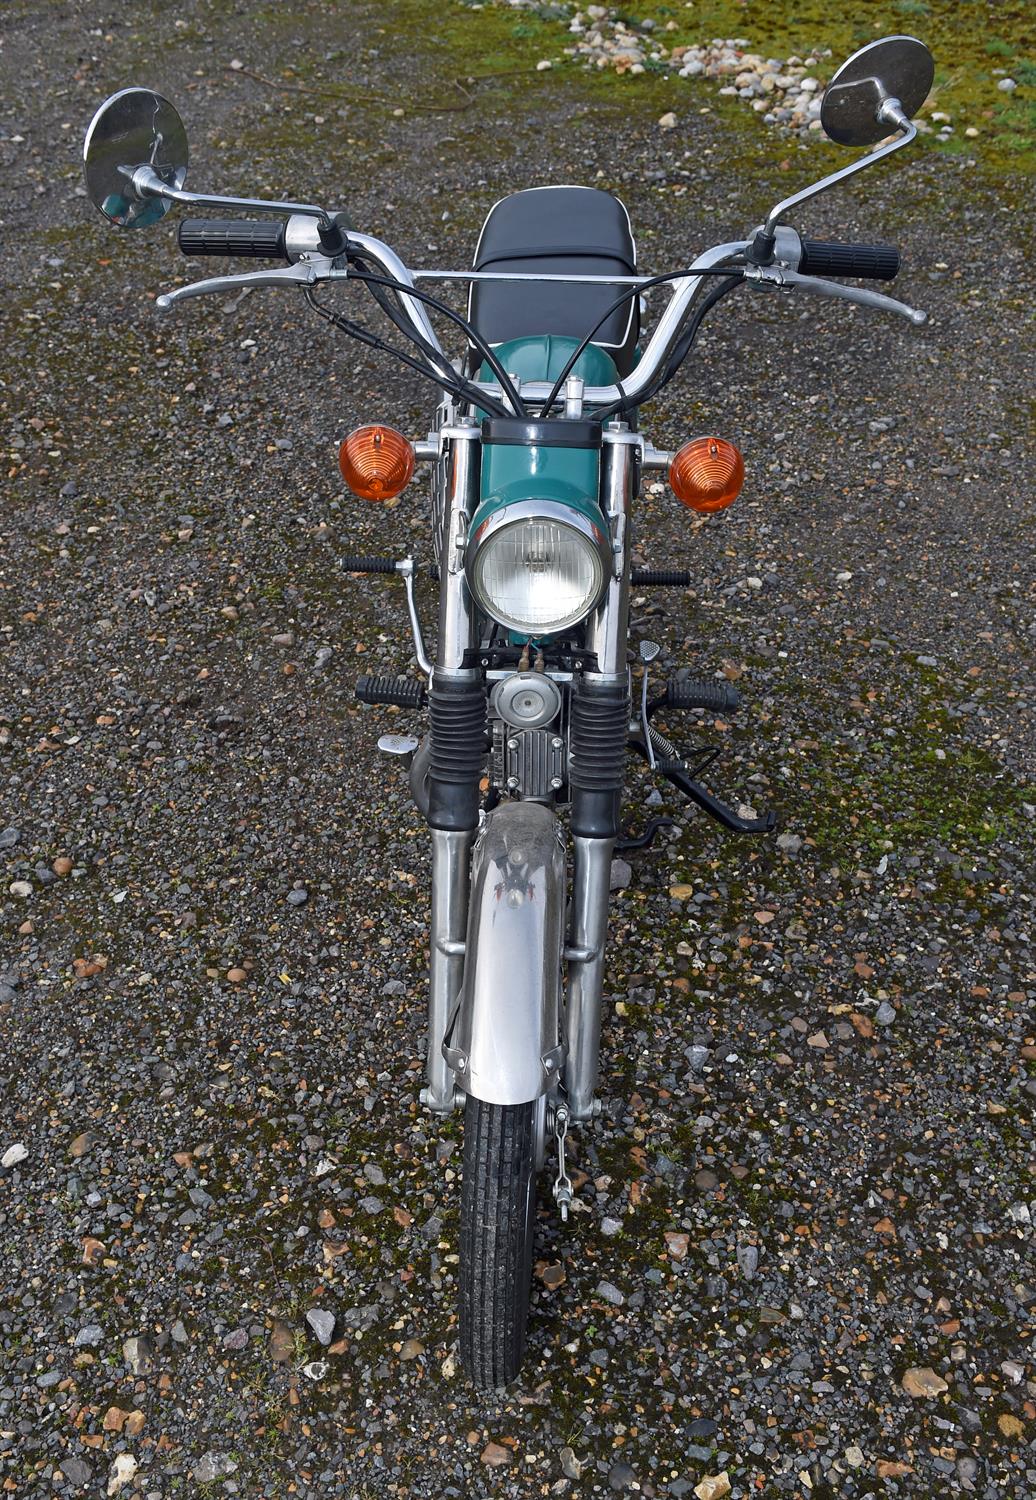 1969 Honda SS50 4 Speed. Registration number: BHY 973H. This Honda SS50 was restored in 2020 prior - Image 3 of 9